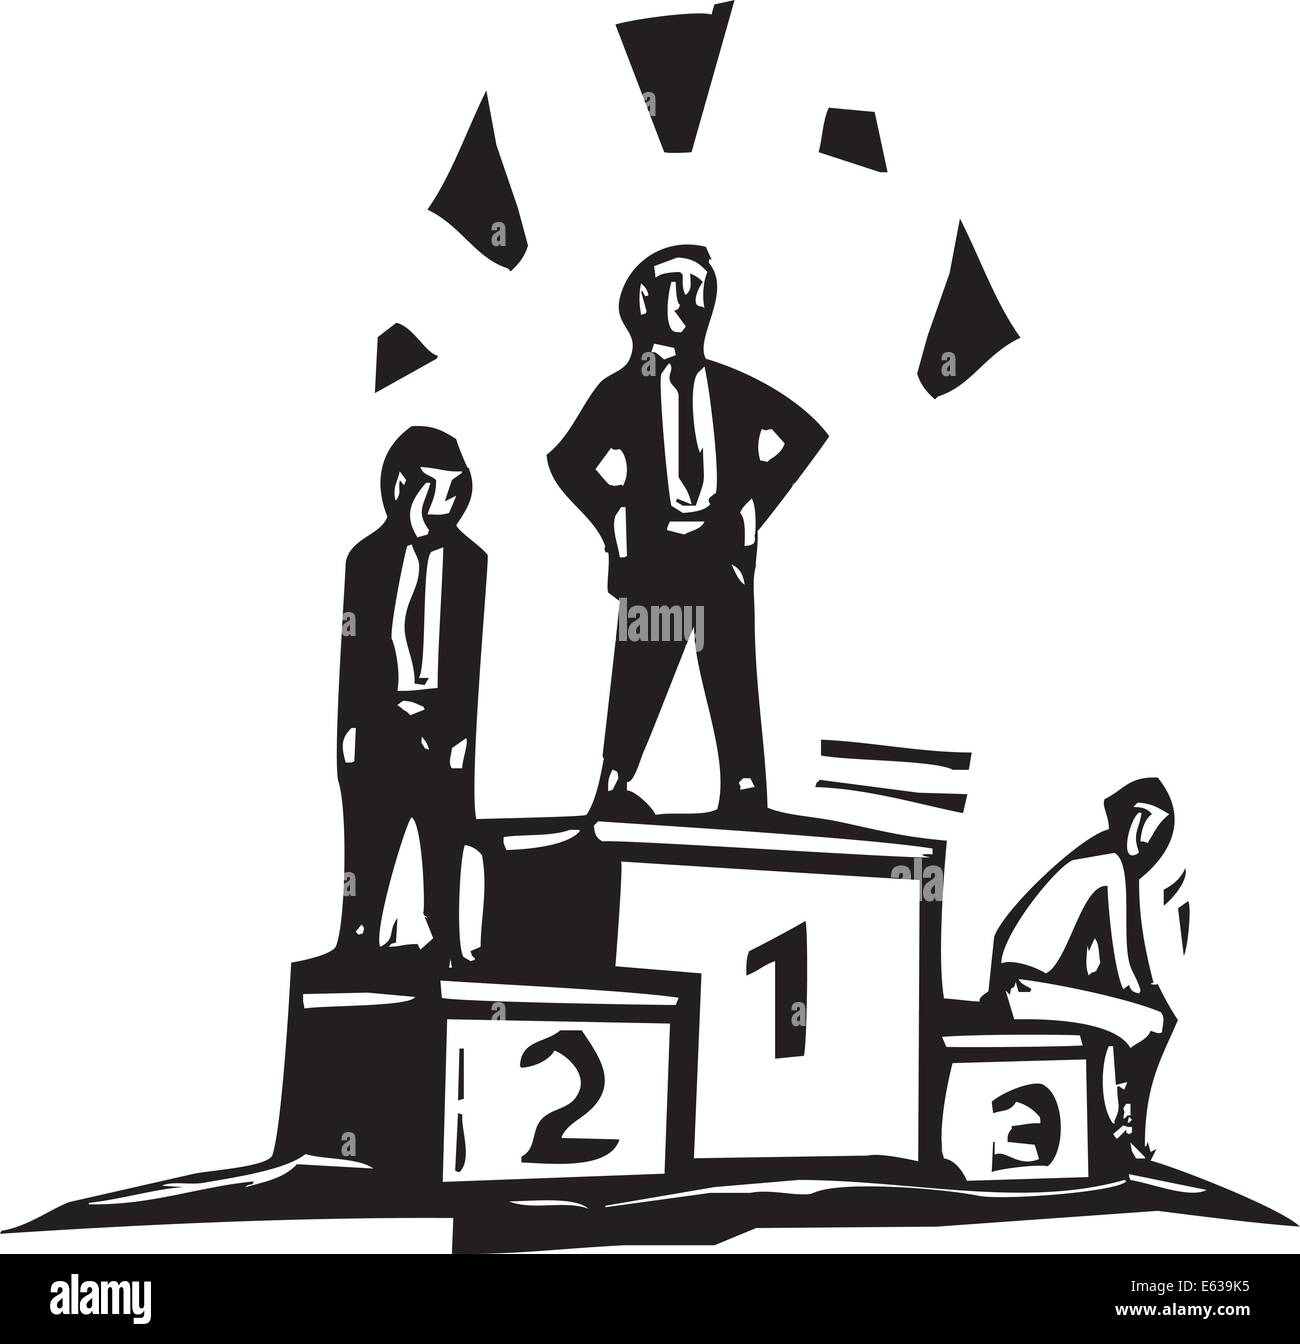 Woodcut business image of three people standing on platform after a contest. Stock Vector